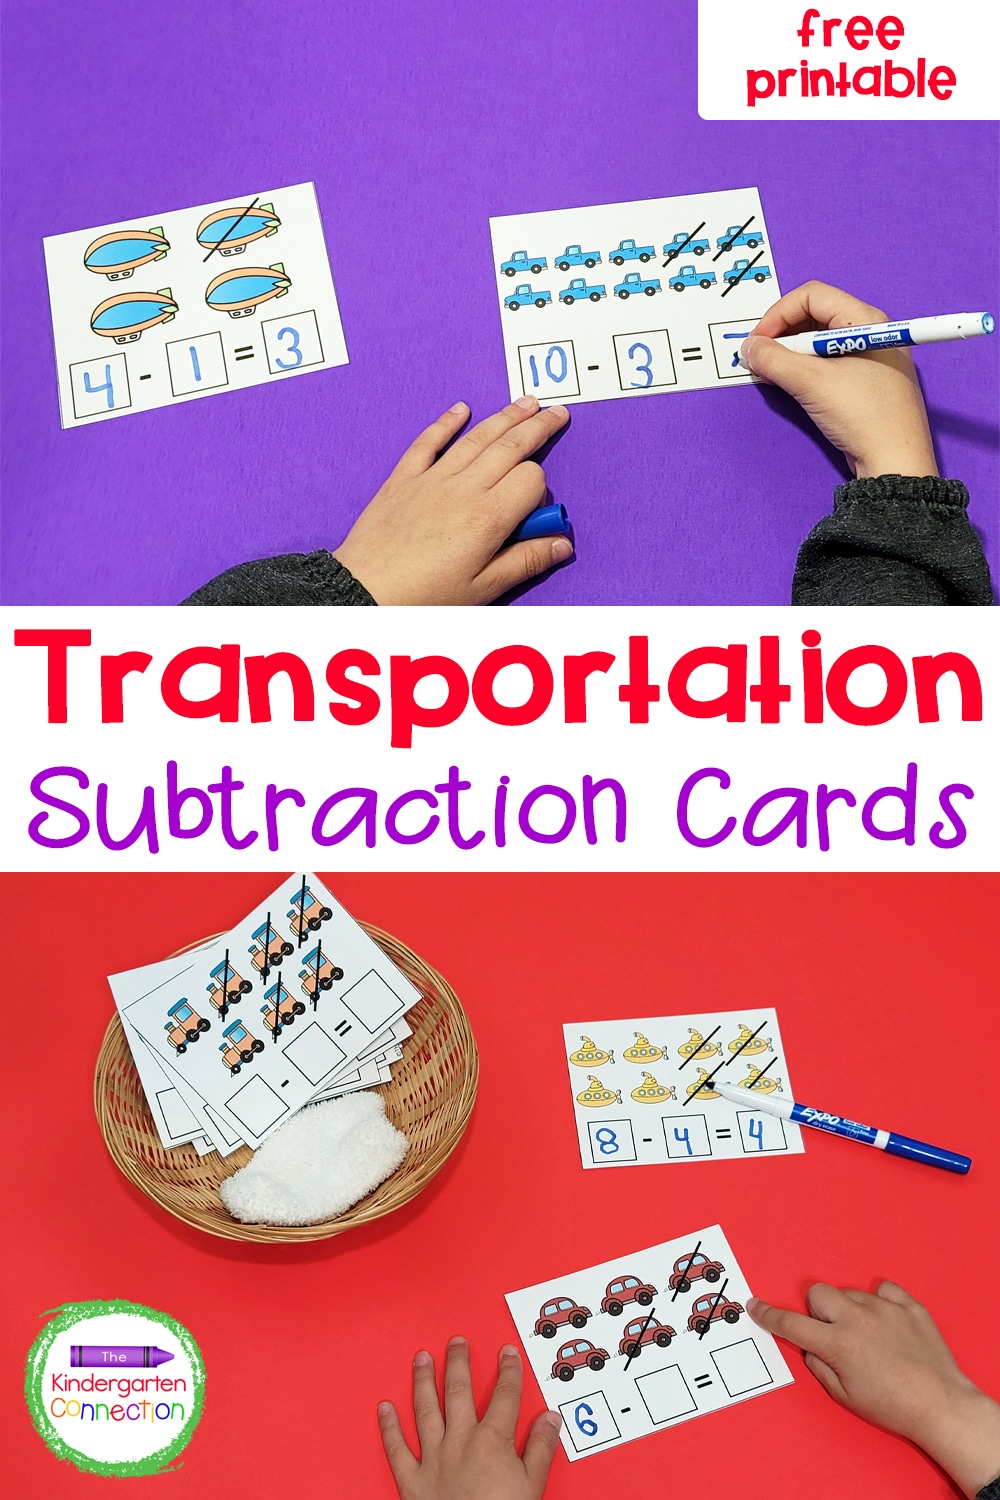 These free Transportation Subtraction Cards are a fun introduction to building equations for subtraction within 10!